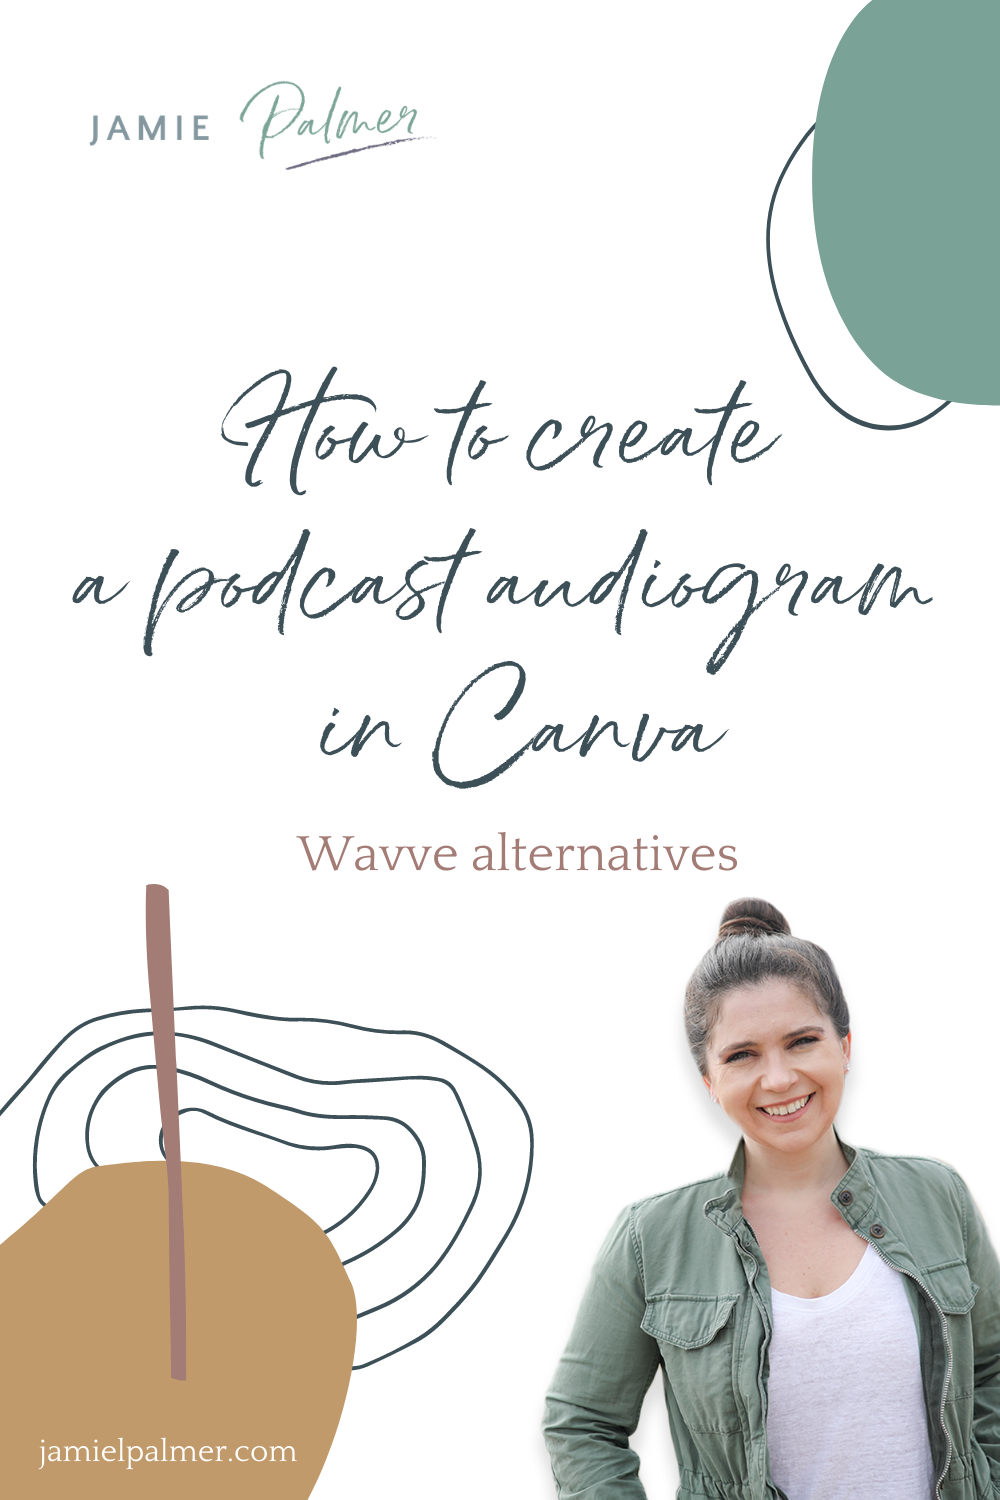 How to create a podcast audiogram in canva pin